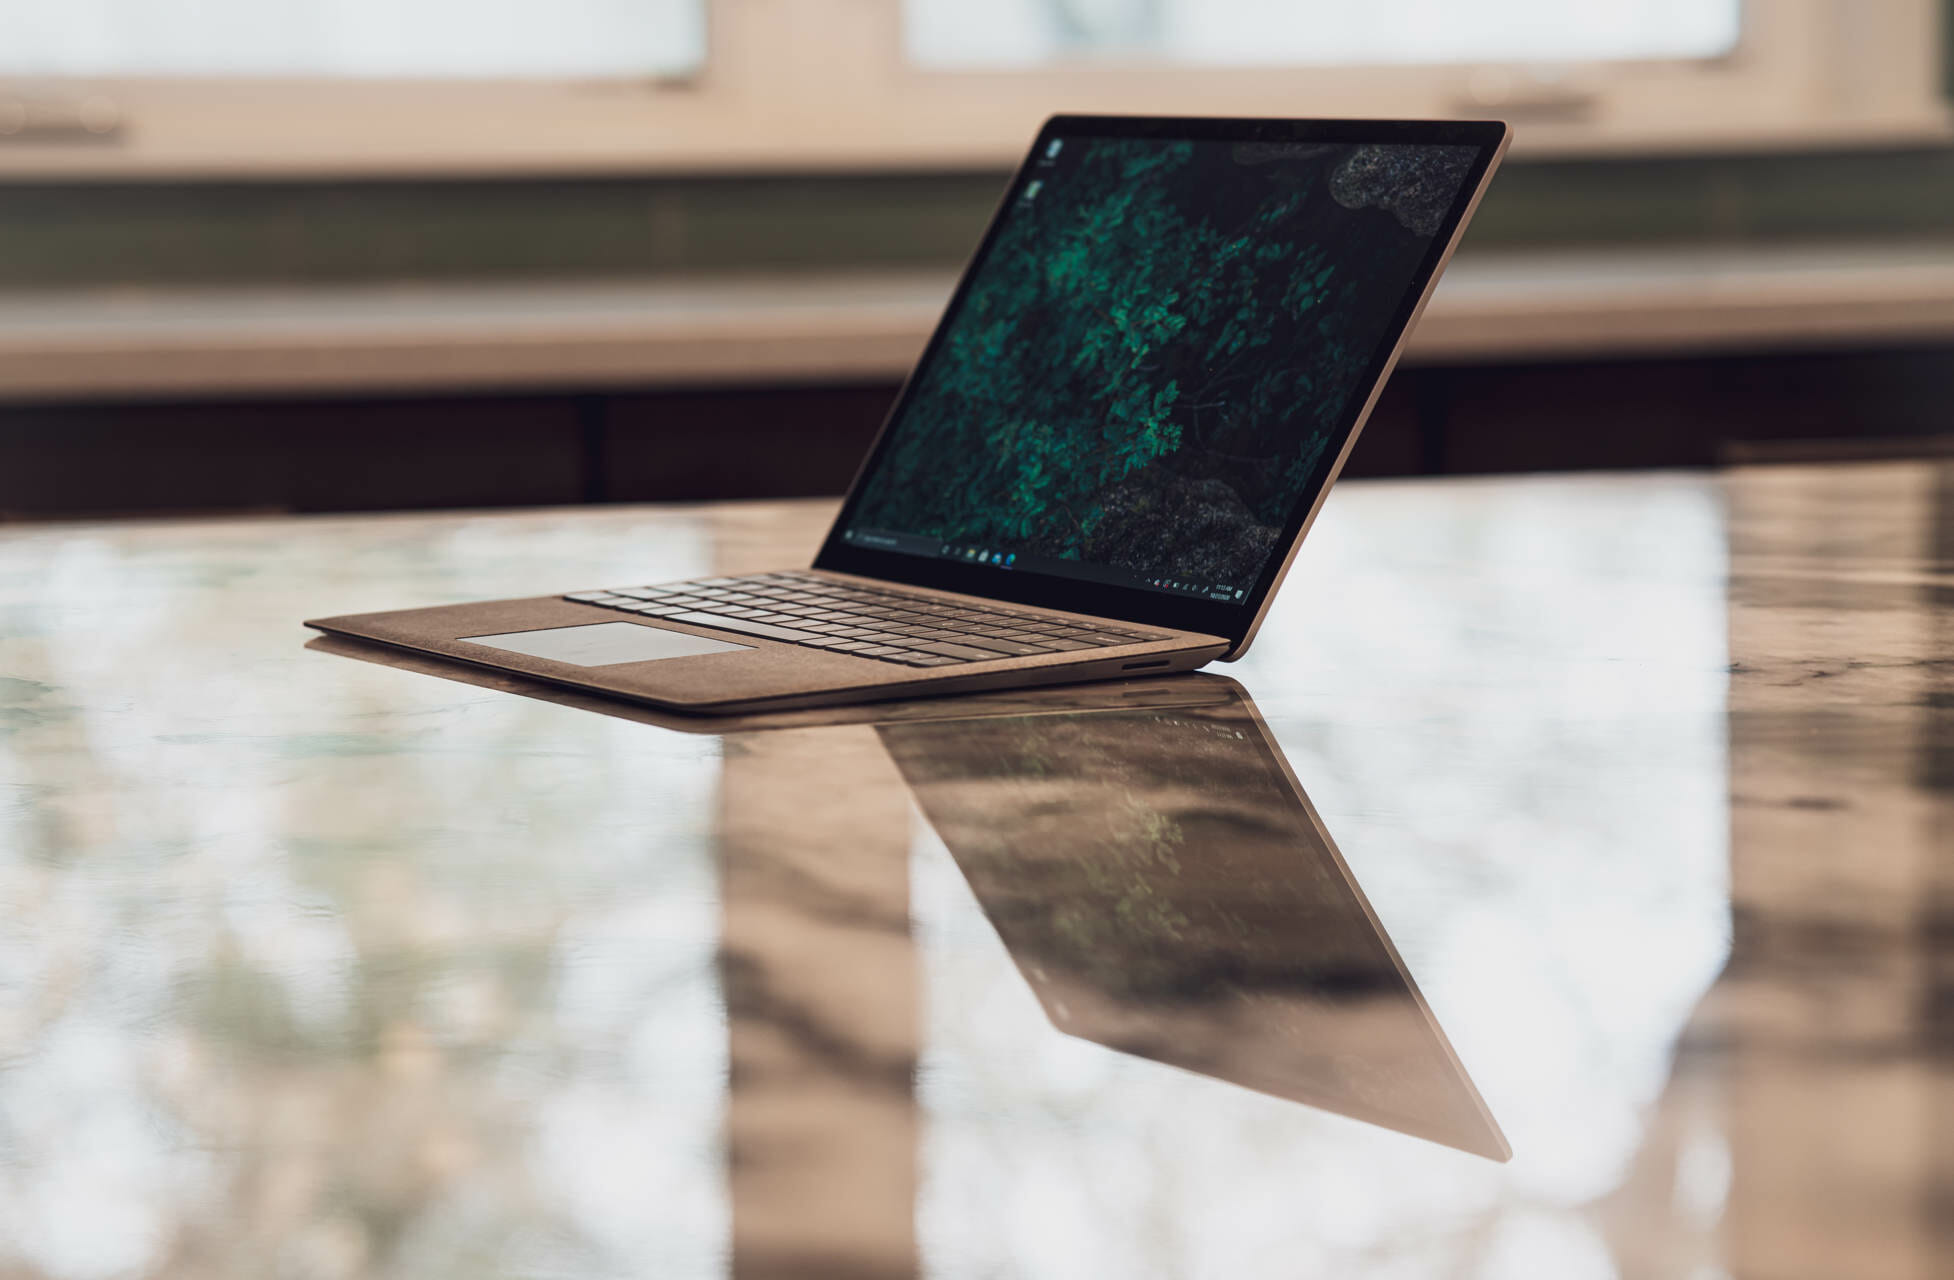 Surface Laptop Wallpapers